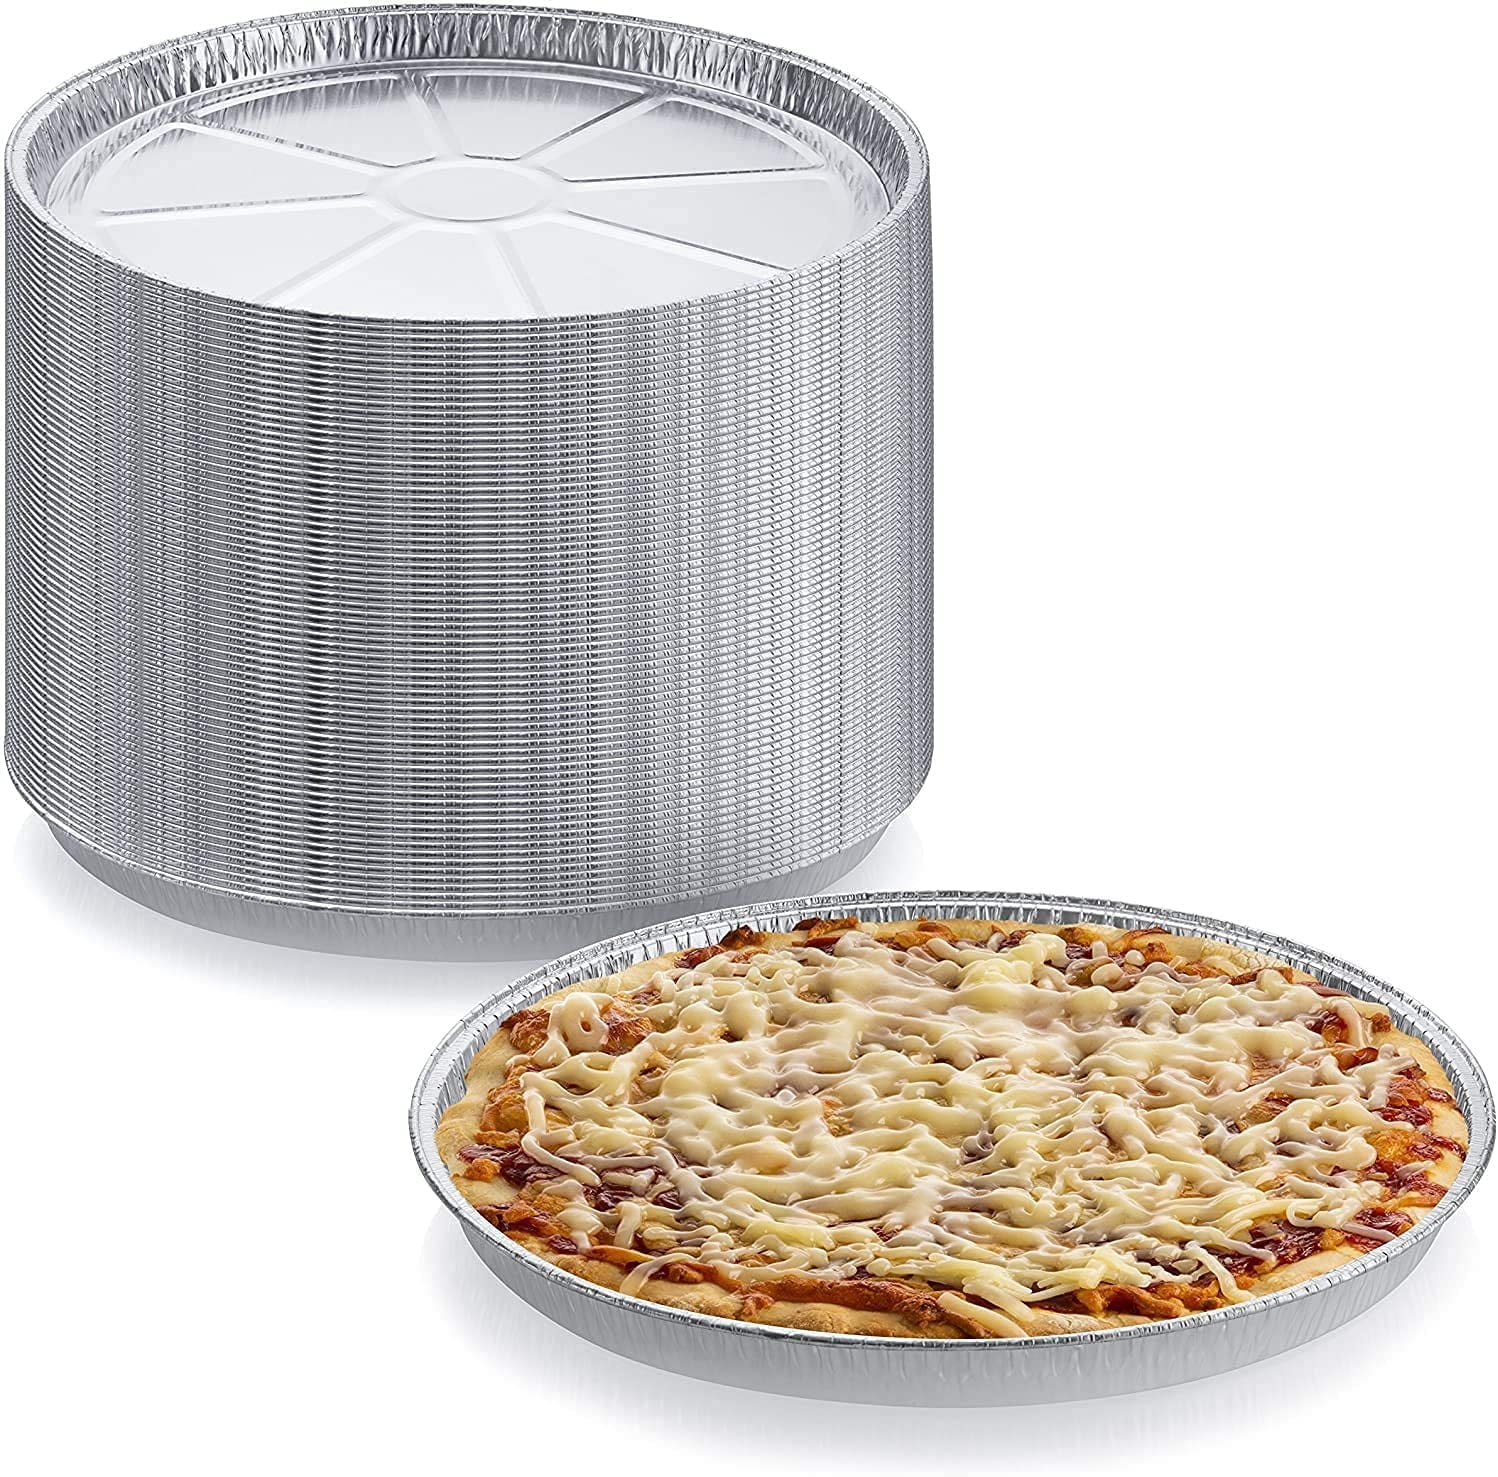 Durable Pizza Tray for Cookies Pack of 25 Disposable Round Foil Pizza Pans Cake Focaccia and More Size: 12-1/4 x 3/8 